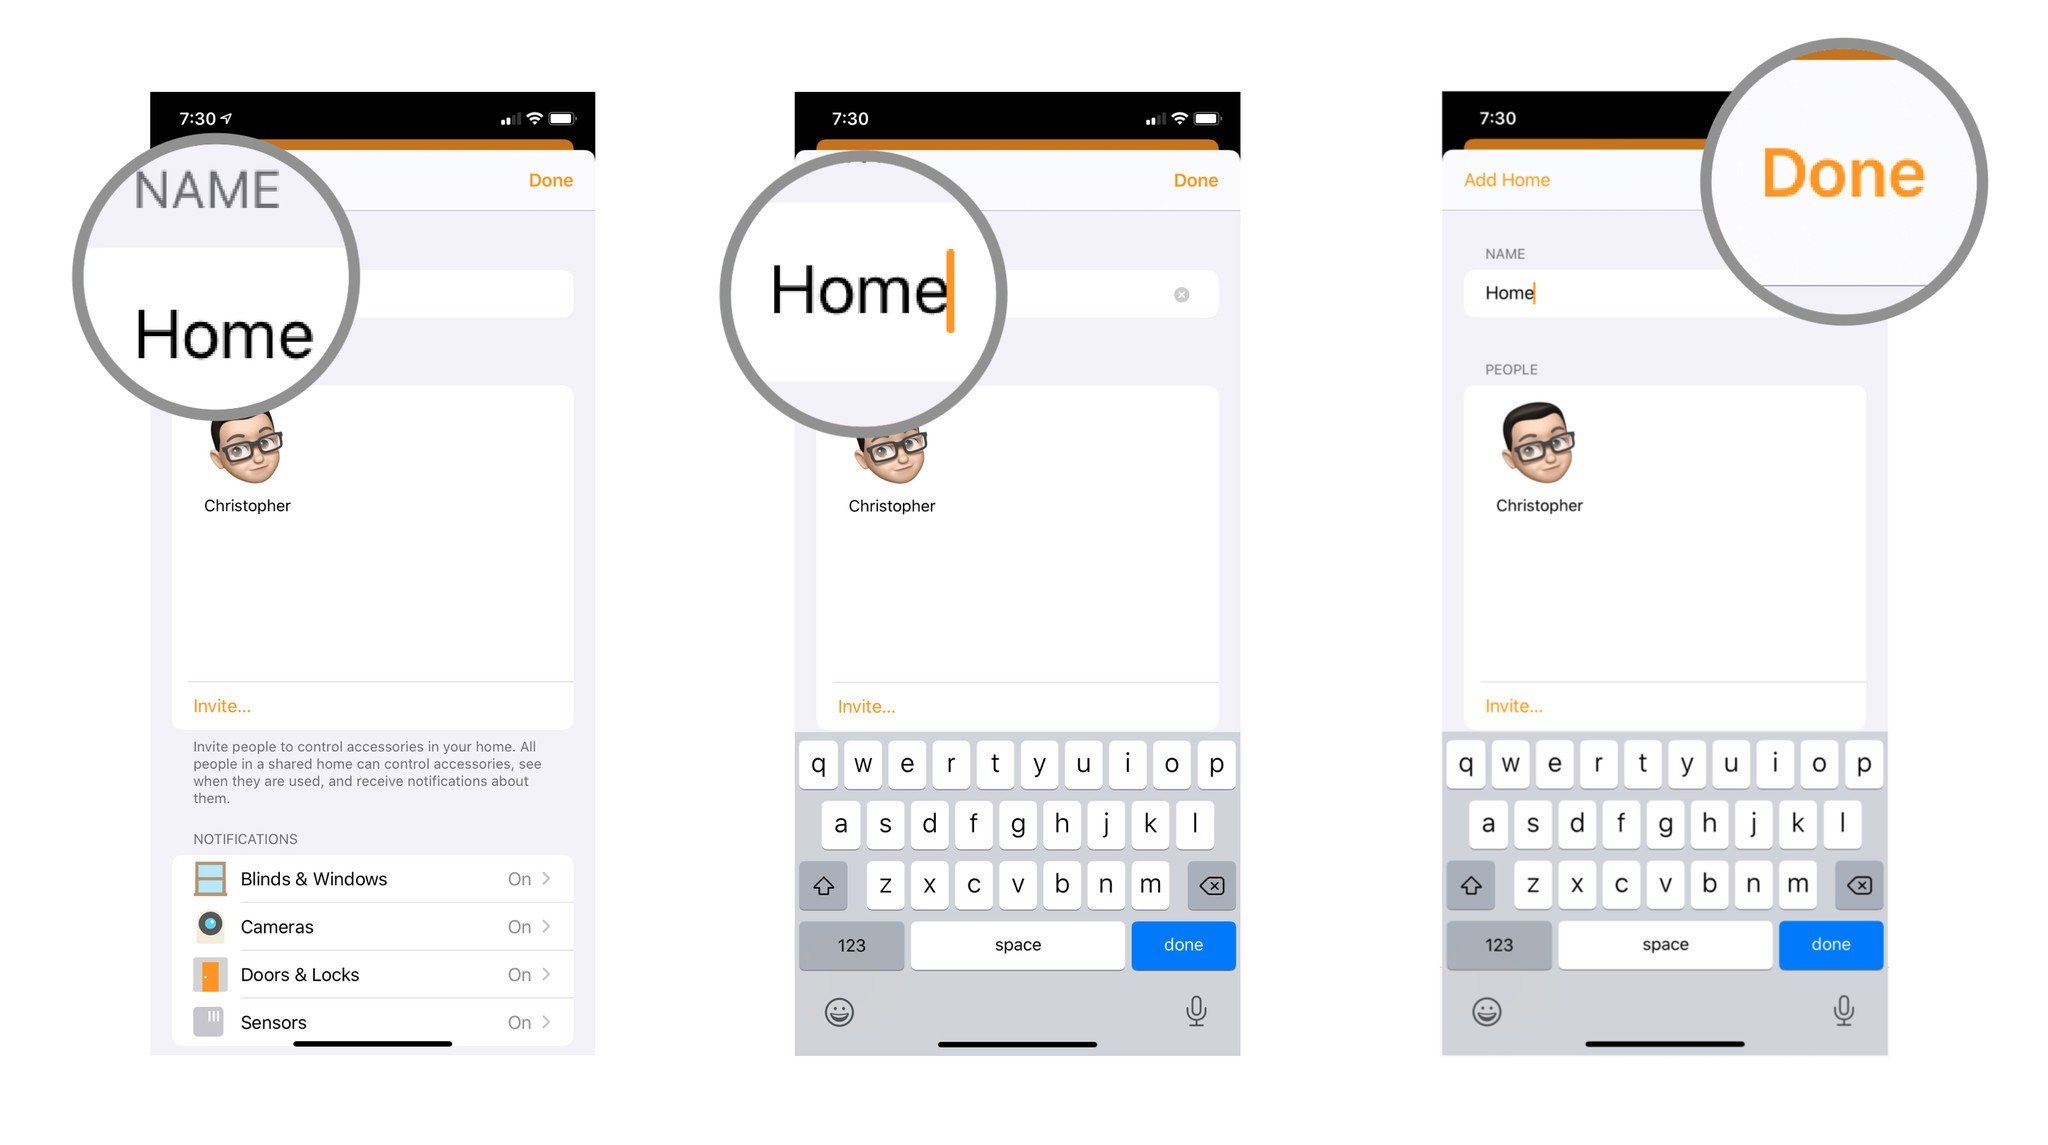 Steps 4-6 depicting how to rename your home in the Home app